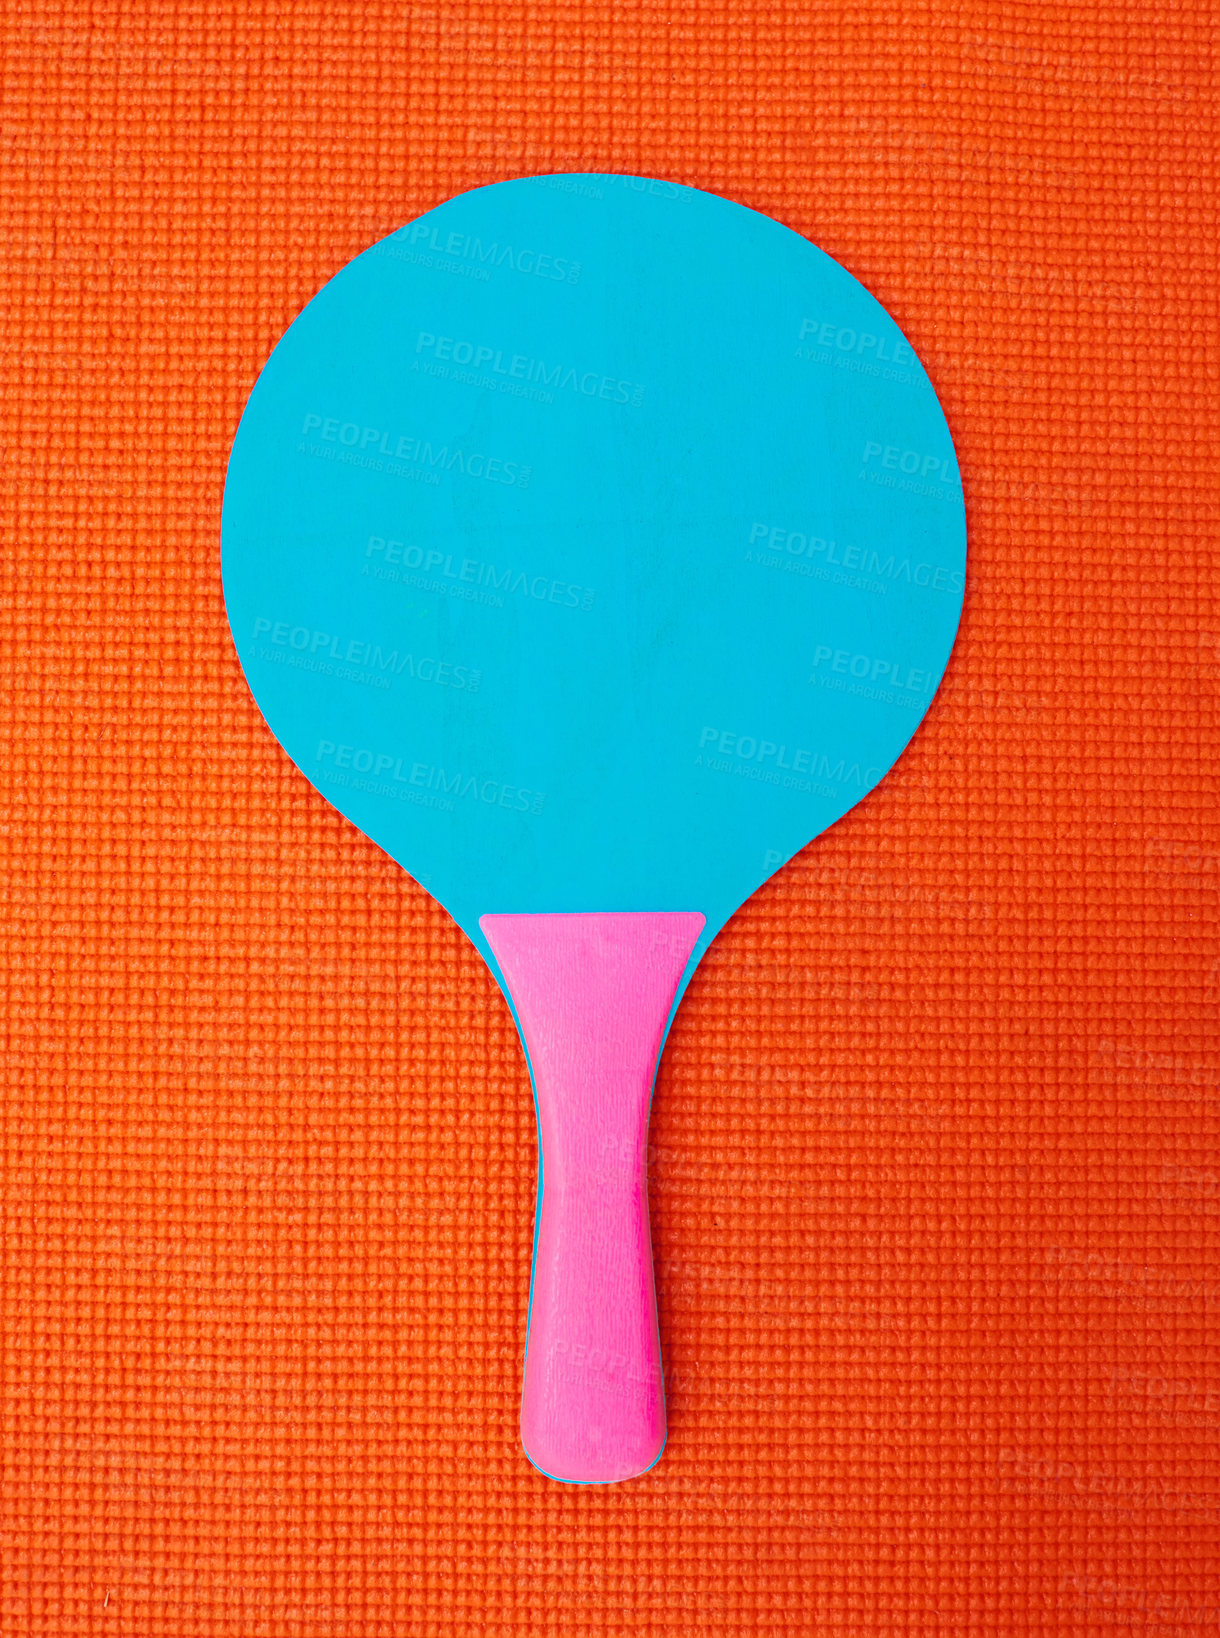 Buy stock photo High angle shot of a table tennis bat placed on top of an orange background inside of a studio